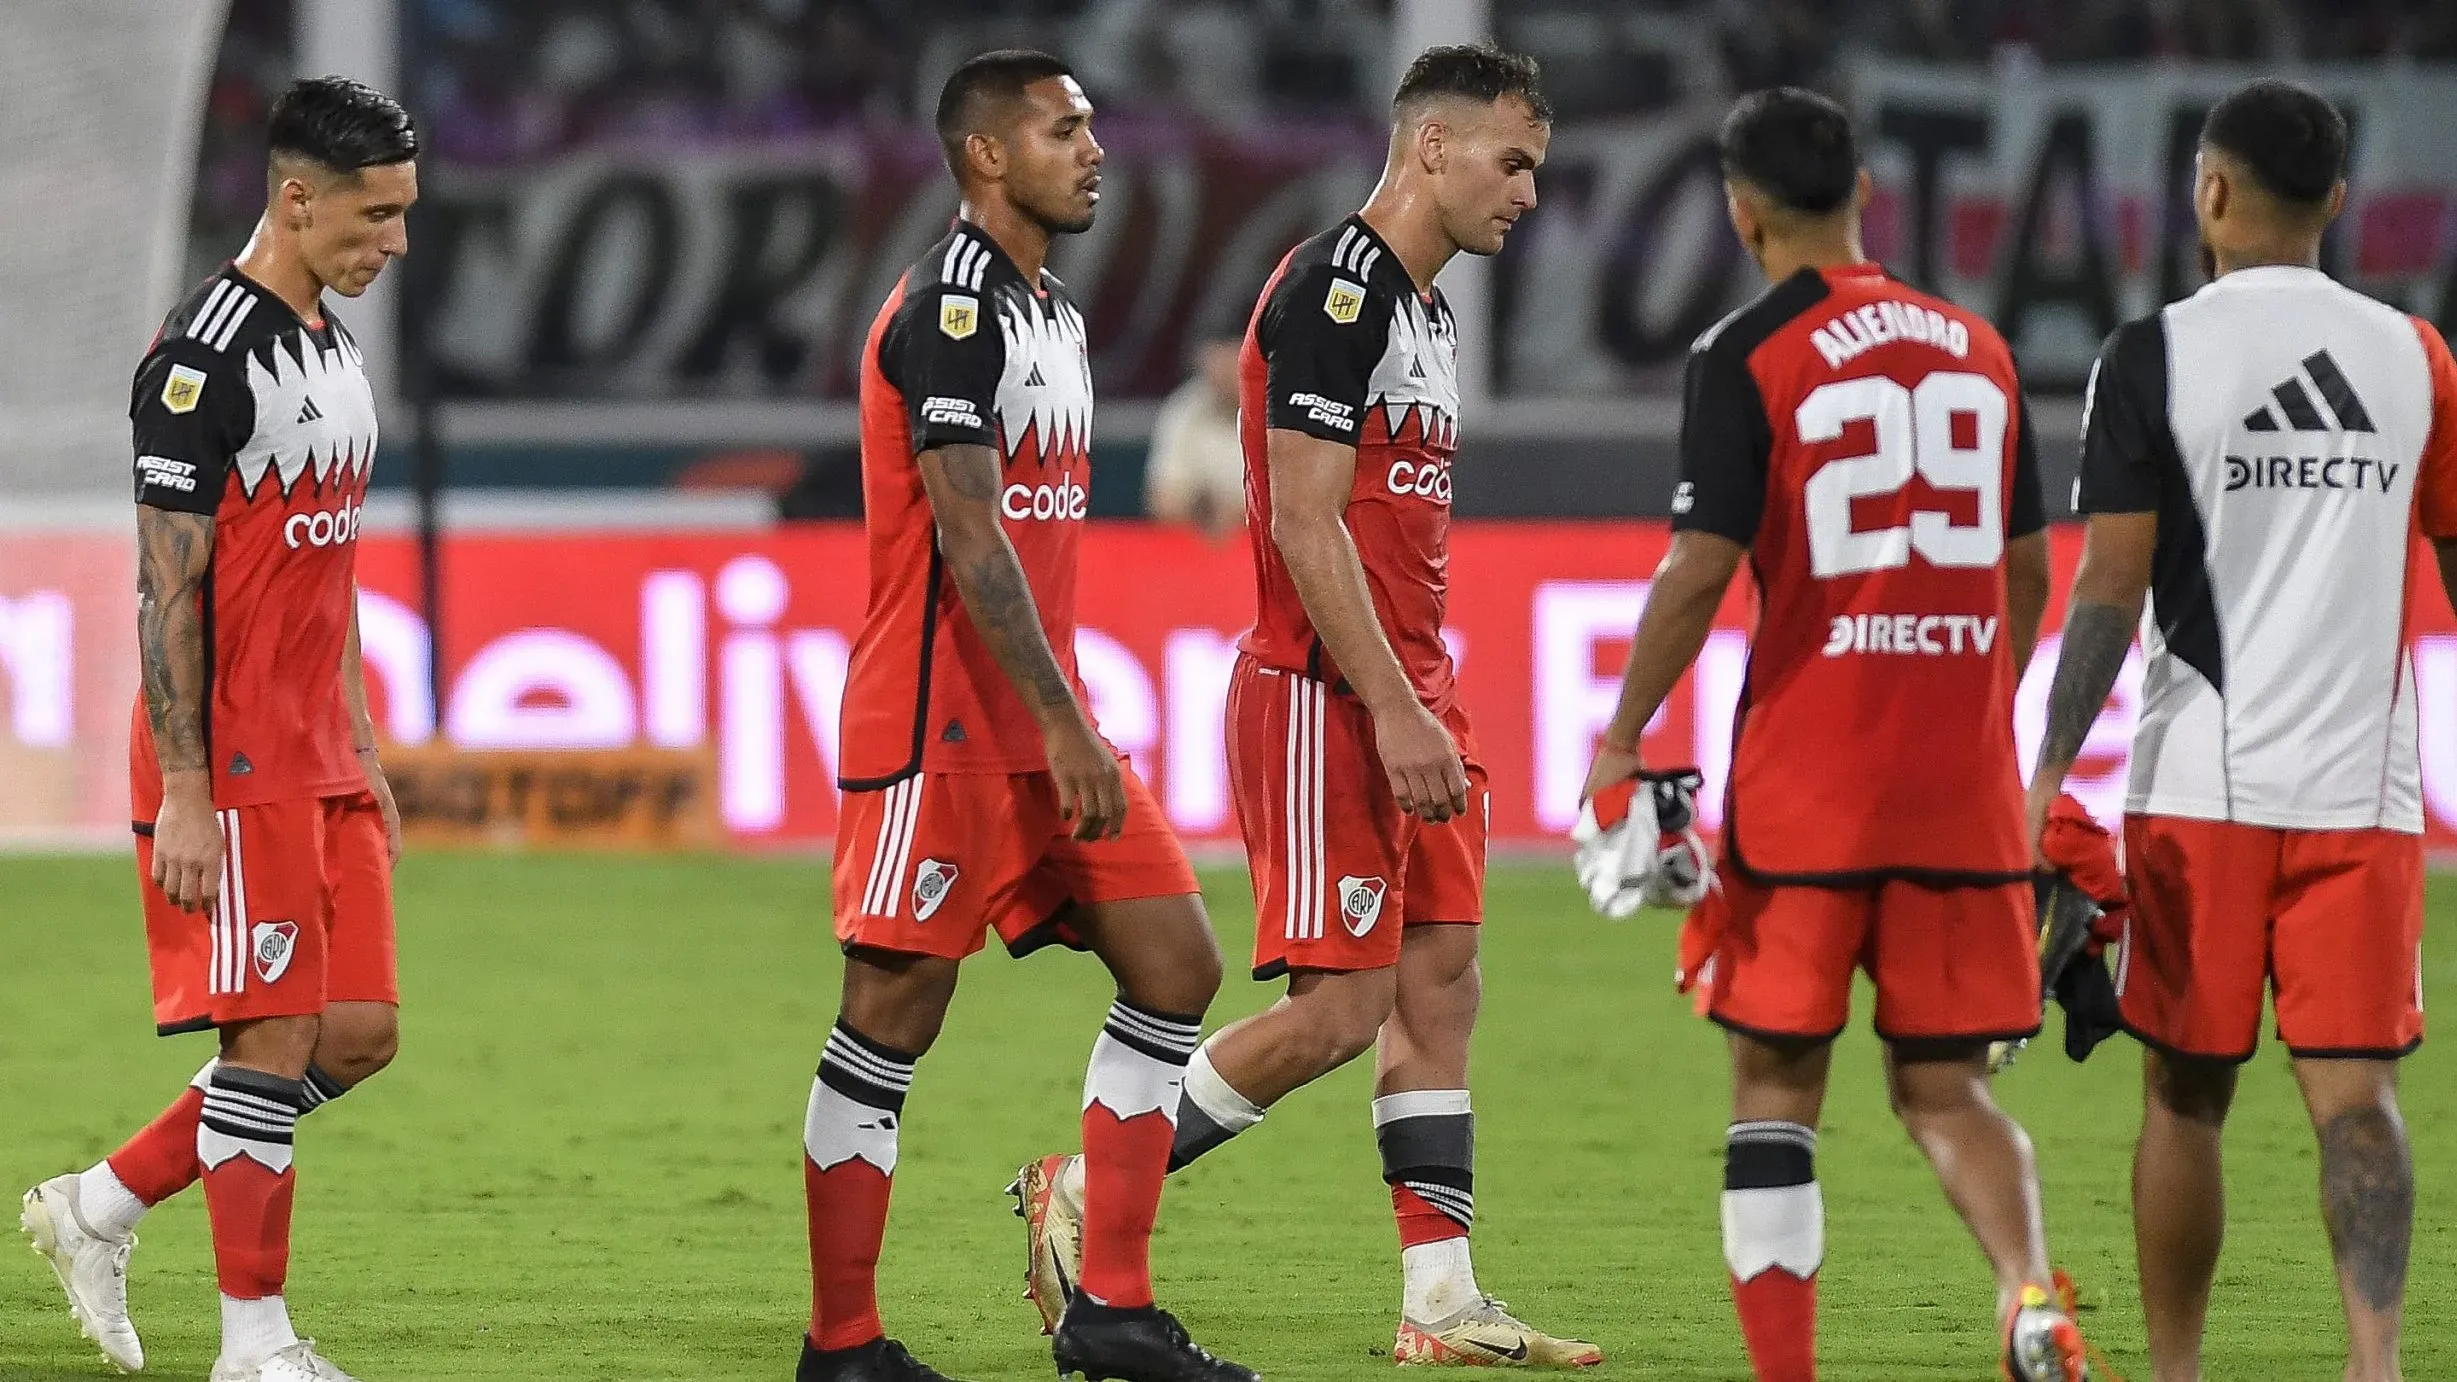 CORDOBA, ARGENTINA - MARCH 02: Players of River Plate react after the match draw during a Copa de la Liga Profesional 2024 match between Talleres and River Plate at Mario Alberto Kempes Stadium on March 02, 2024 in Cordoba, Argentina. (Photo by Hernan Cortez/Getty Images)